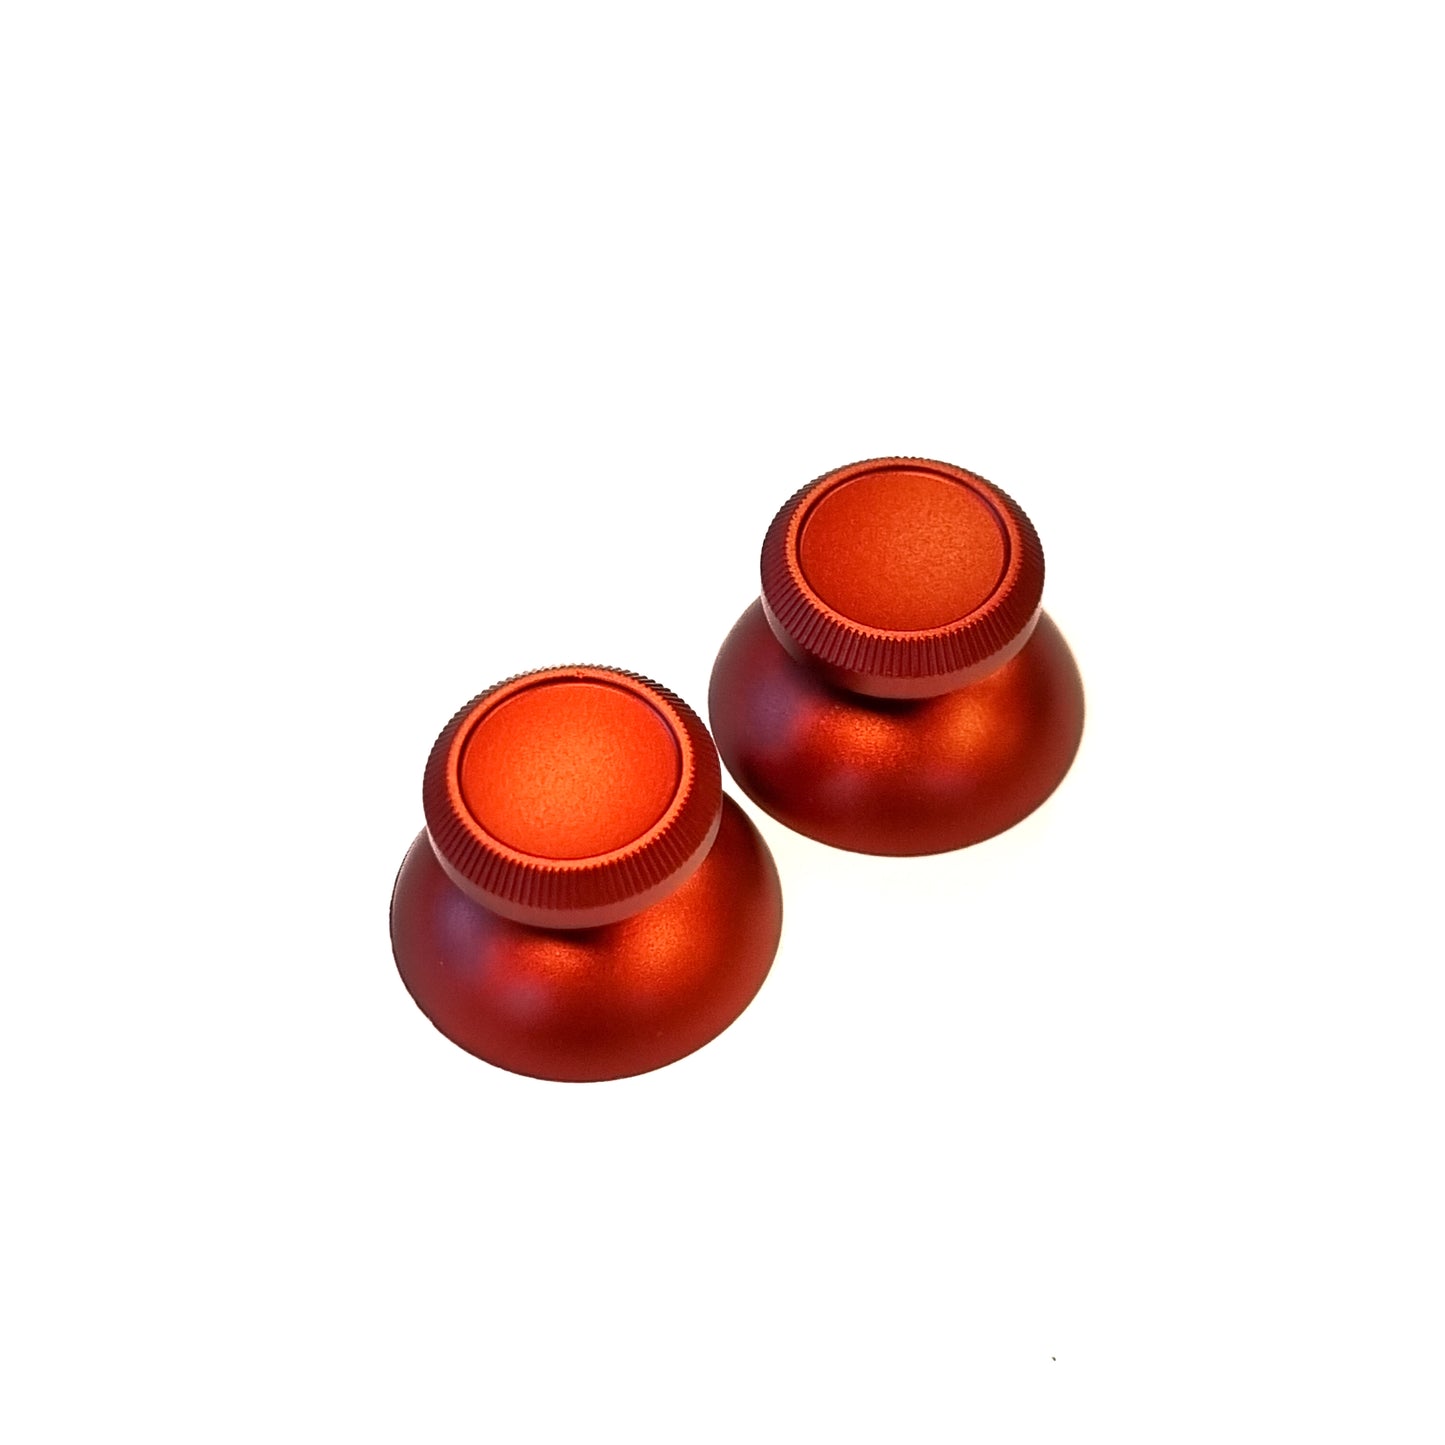 Gaming Thumbgrips | Performance Antislip Thumbsticks | Joystick Cap Thumb Grips | Glimmend - Rood | Accessoires geschikt voor Playstation PS4 PS5 & Xbox & Nintendo Pro Controller